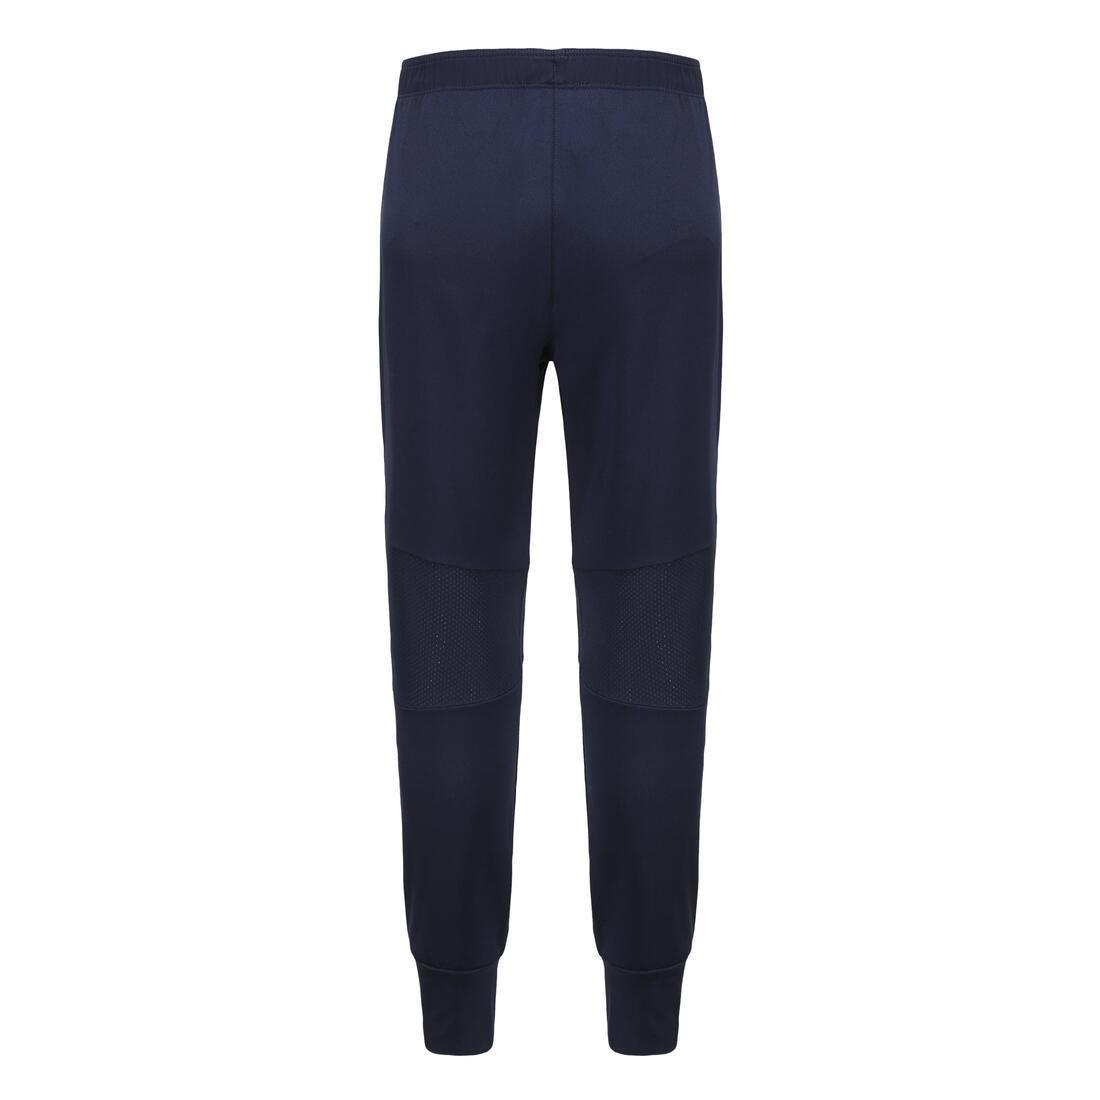 DOMYOS - Kids Light Breathable Loose-Fit Jogging Bottoms, Navy Blue